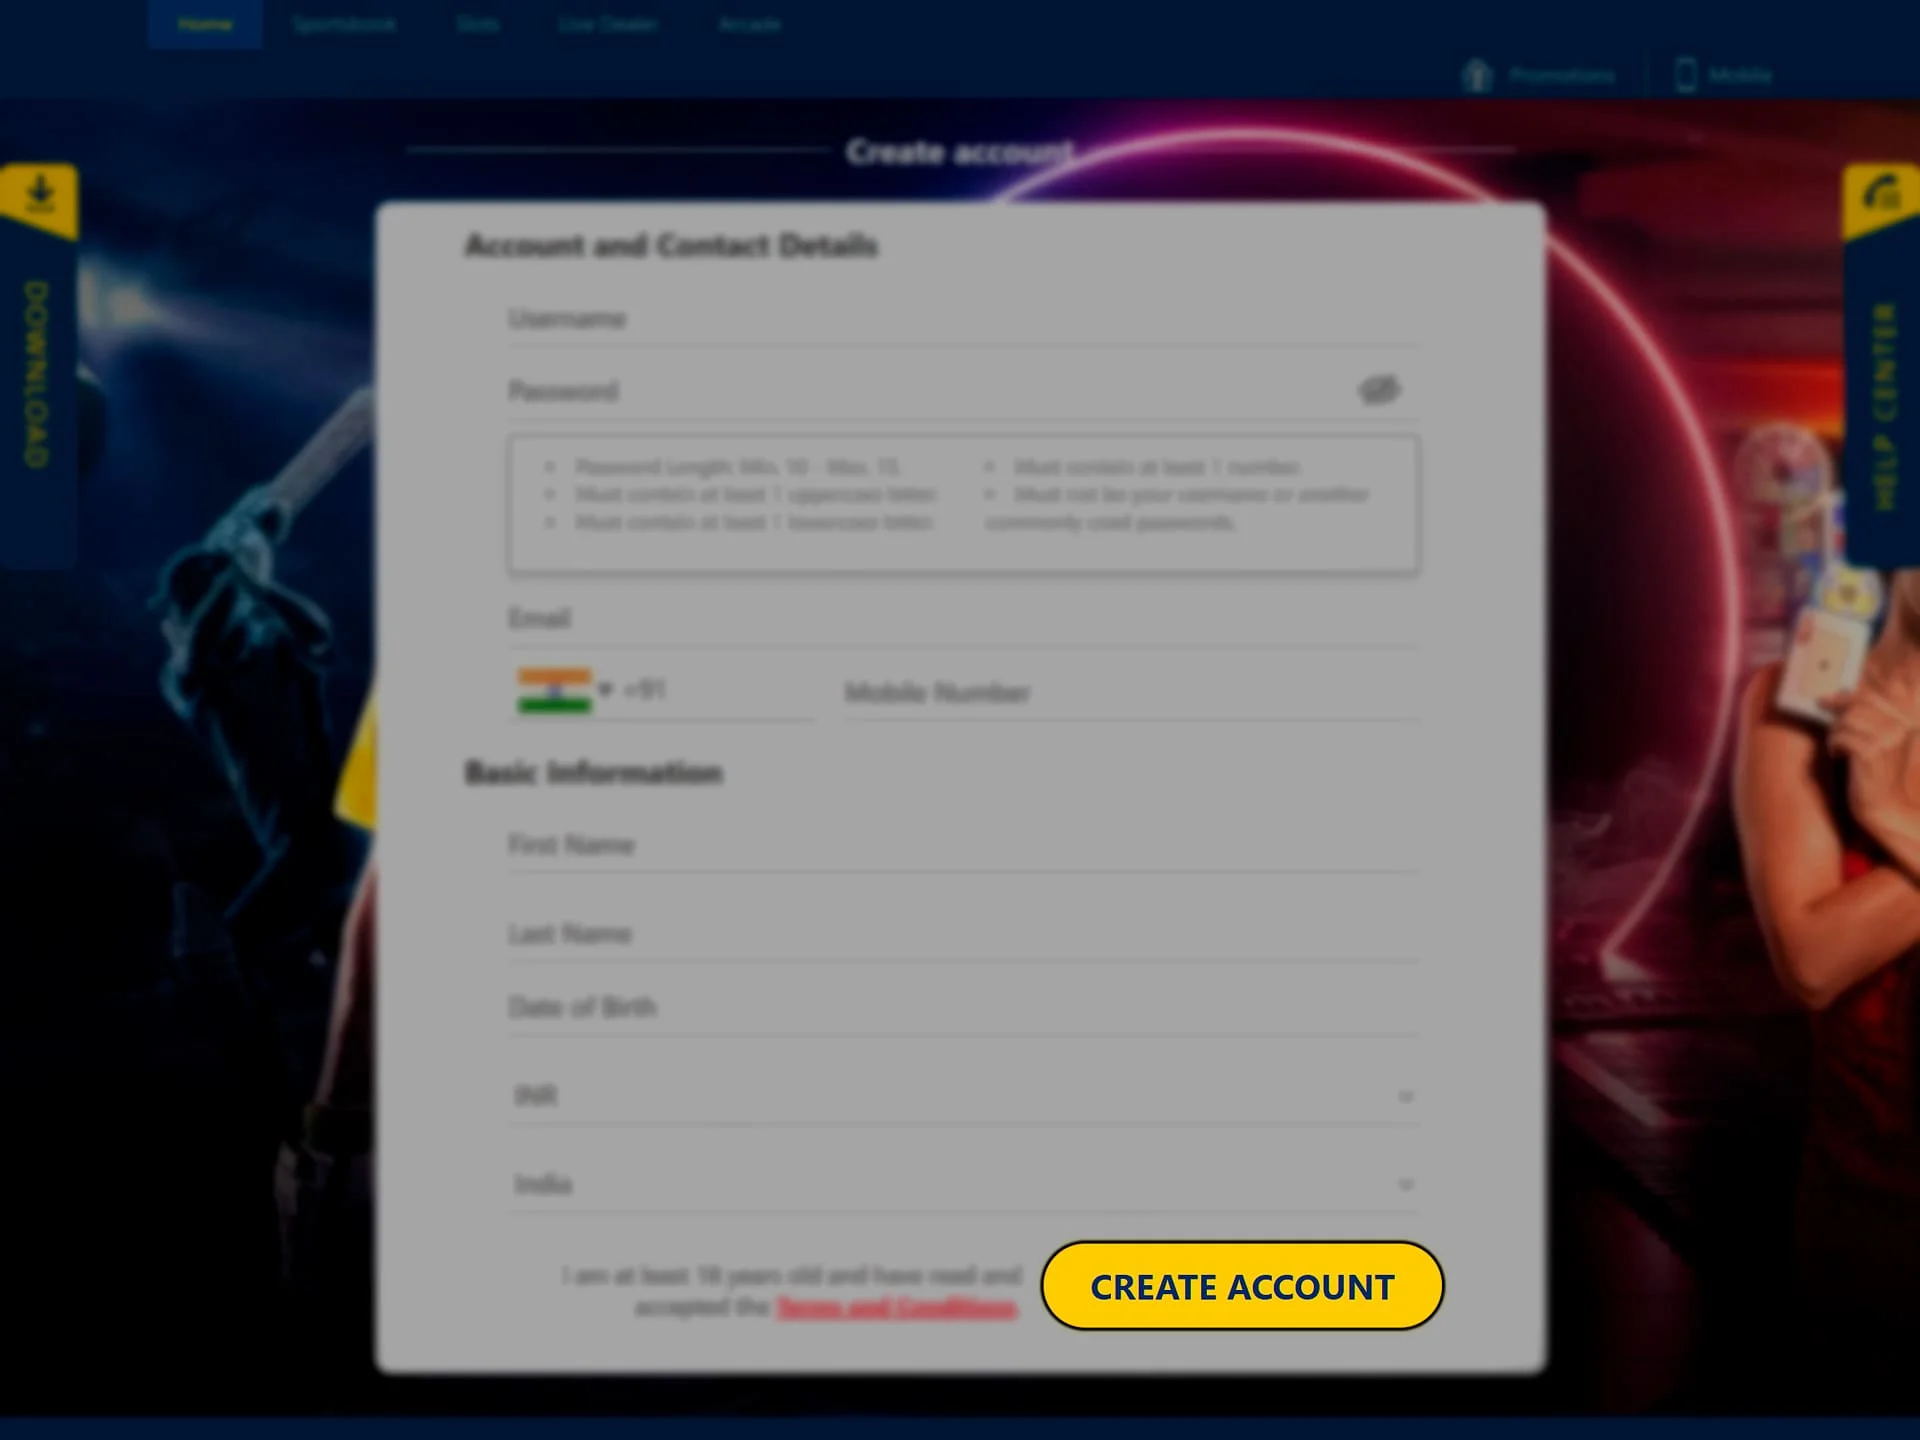 Confirm the creation of an account on the Nextbet platform.